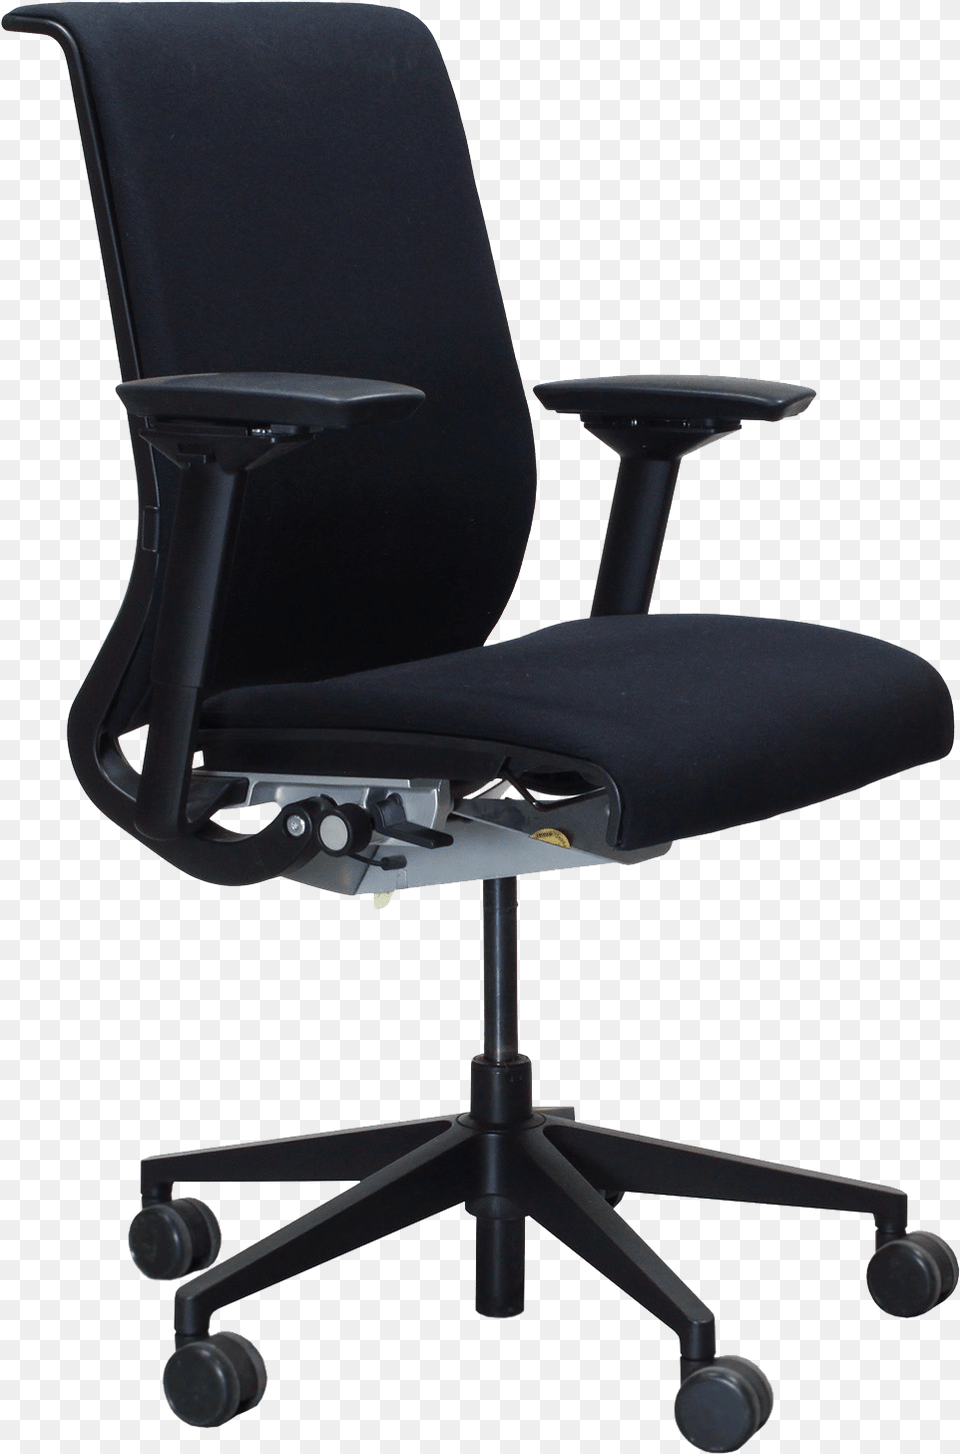 Asis Steelcase Think Chair, Cushion, Furniture, Home Decor Free Transparent Png